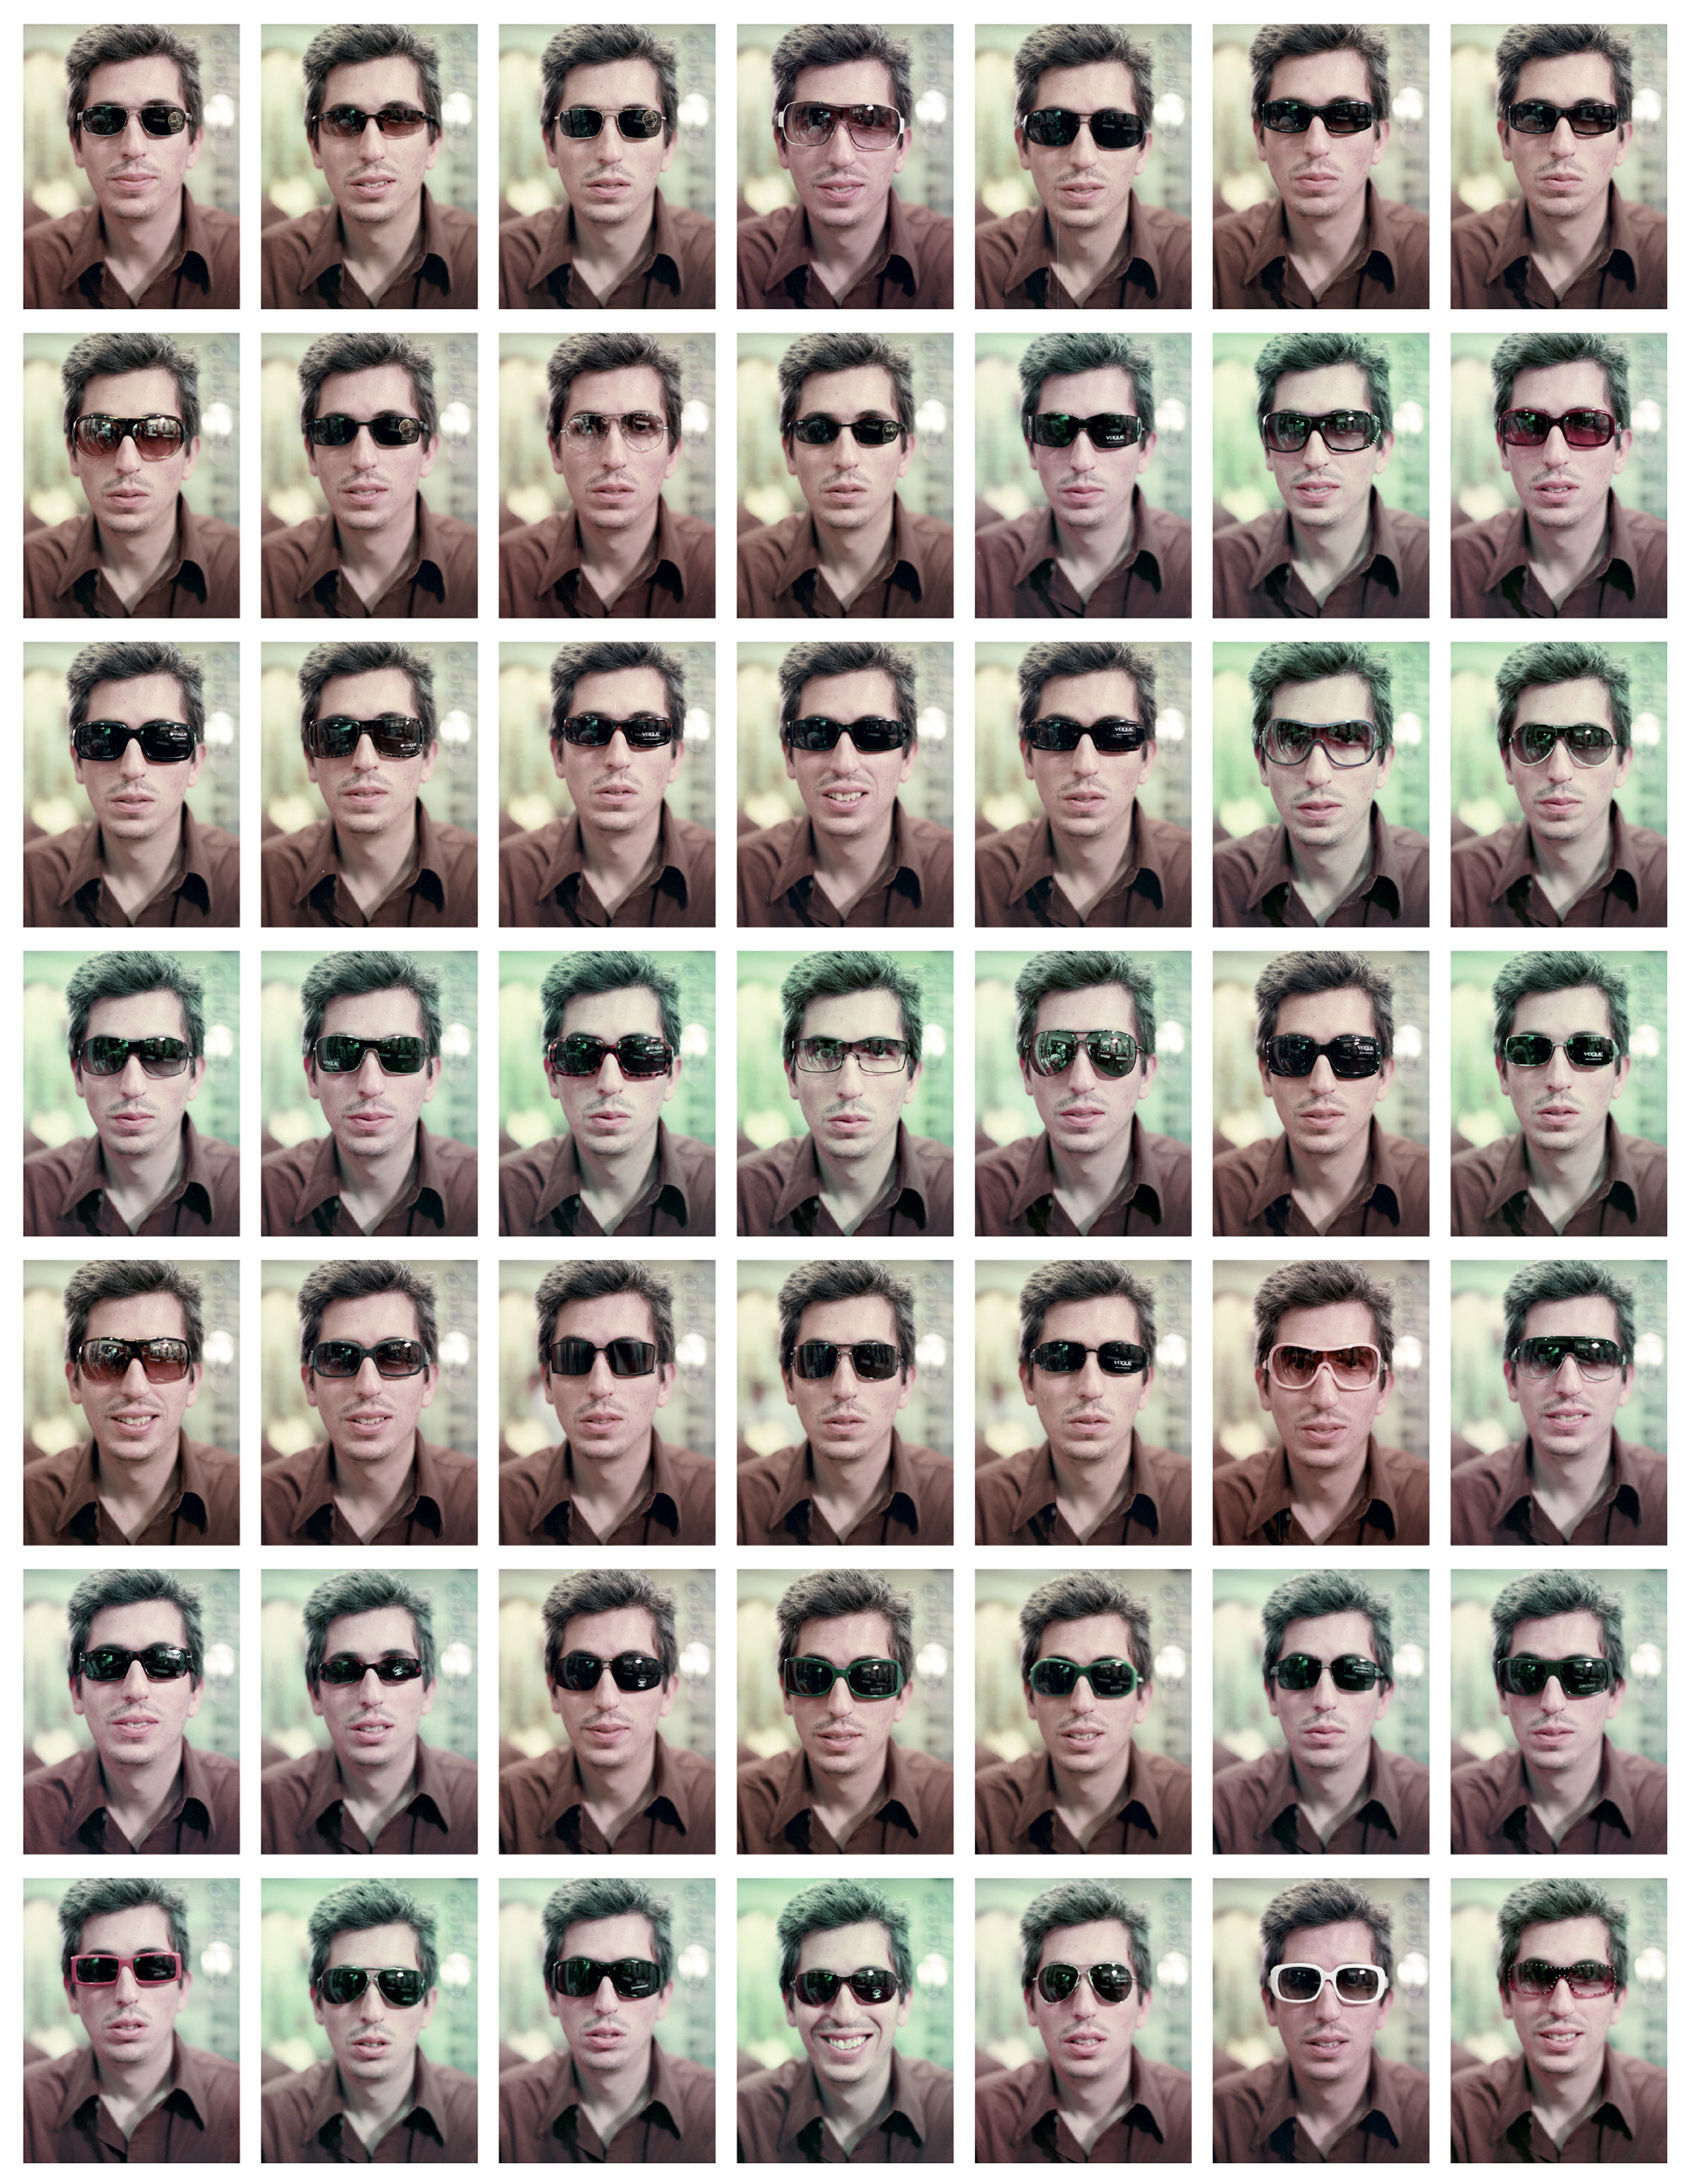 Forty nine small photographs, arranged in a seven by seven grid, of artist San Keller wearing different sunglasses.